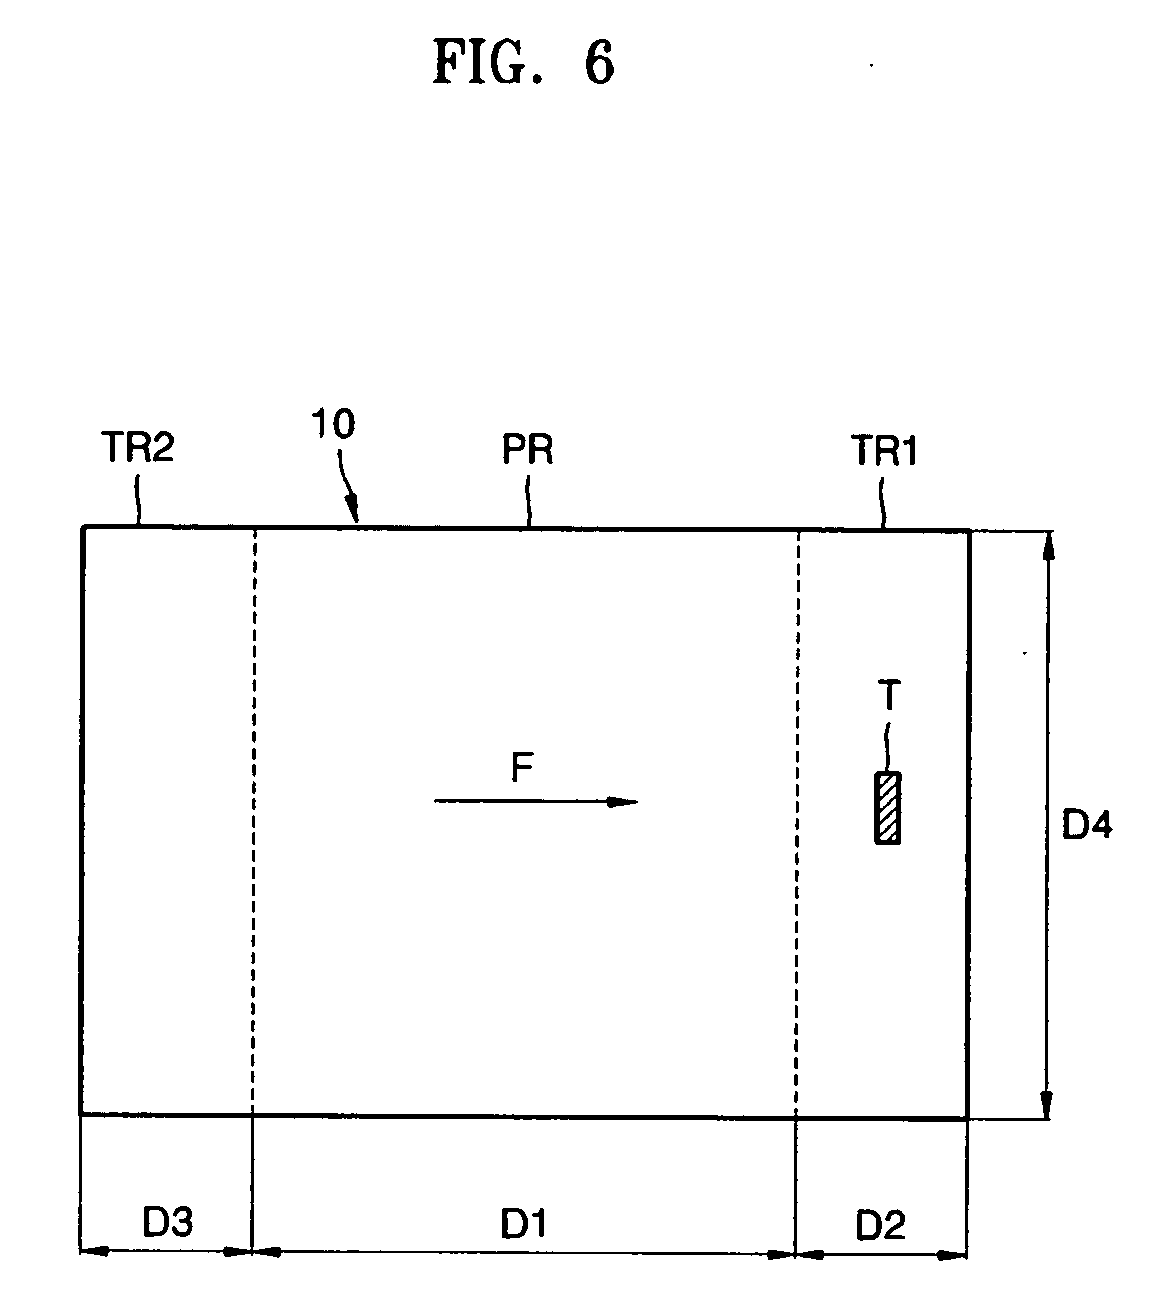 Method of differentiating types of heat sensitive paper